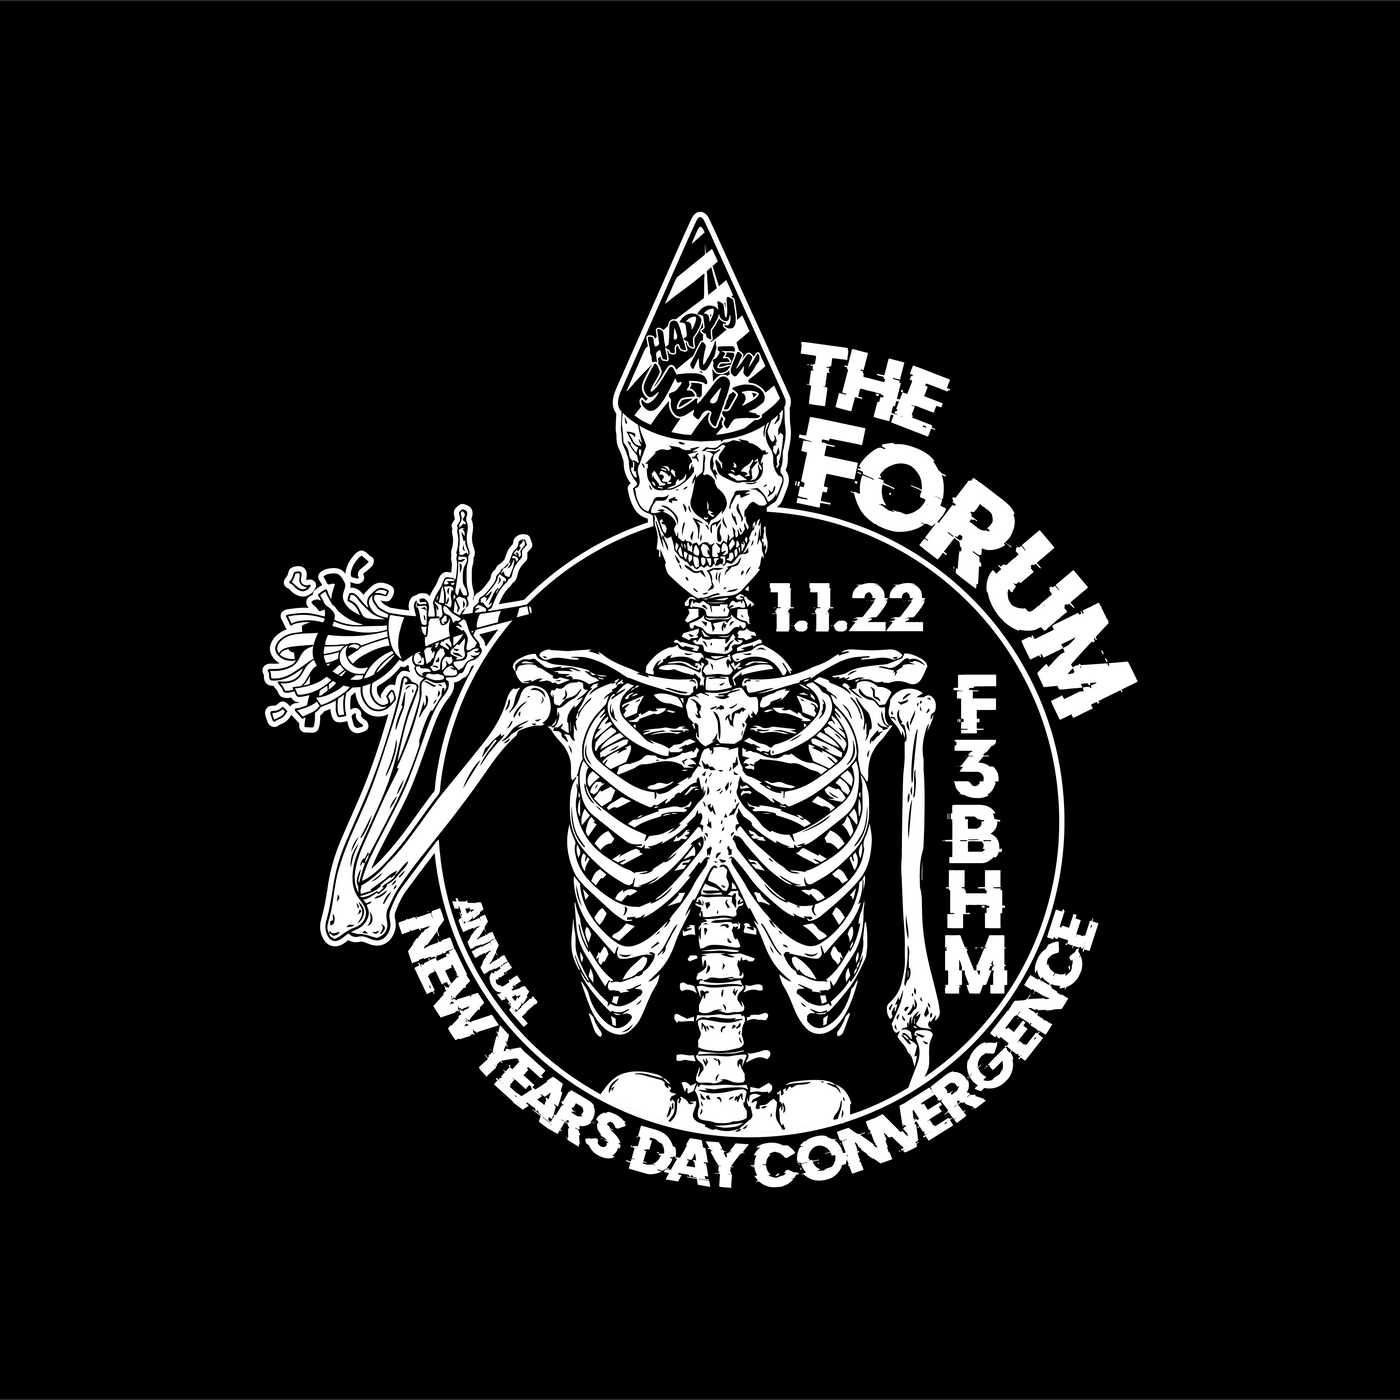 F3 BHM The Forum Pre-Order January 2022